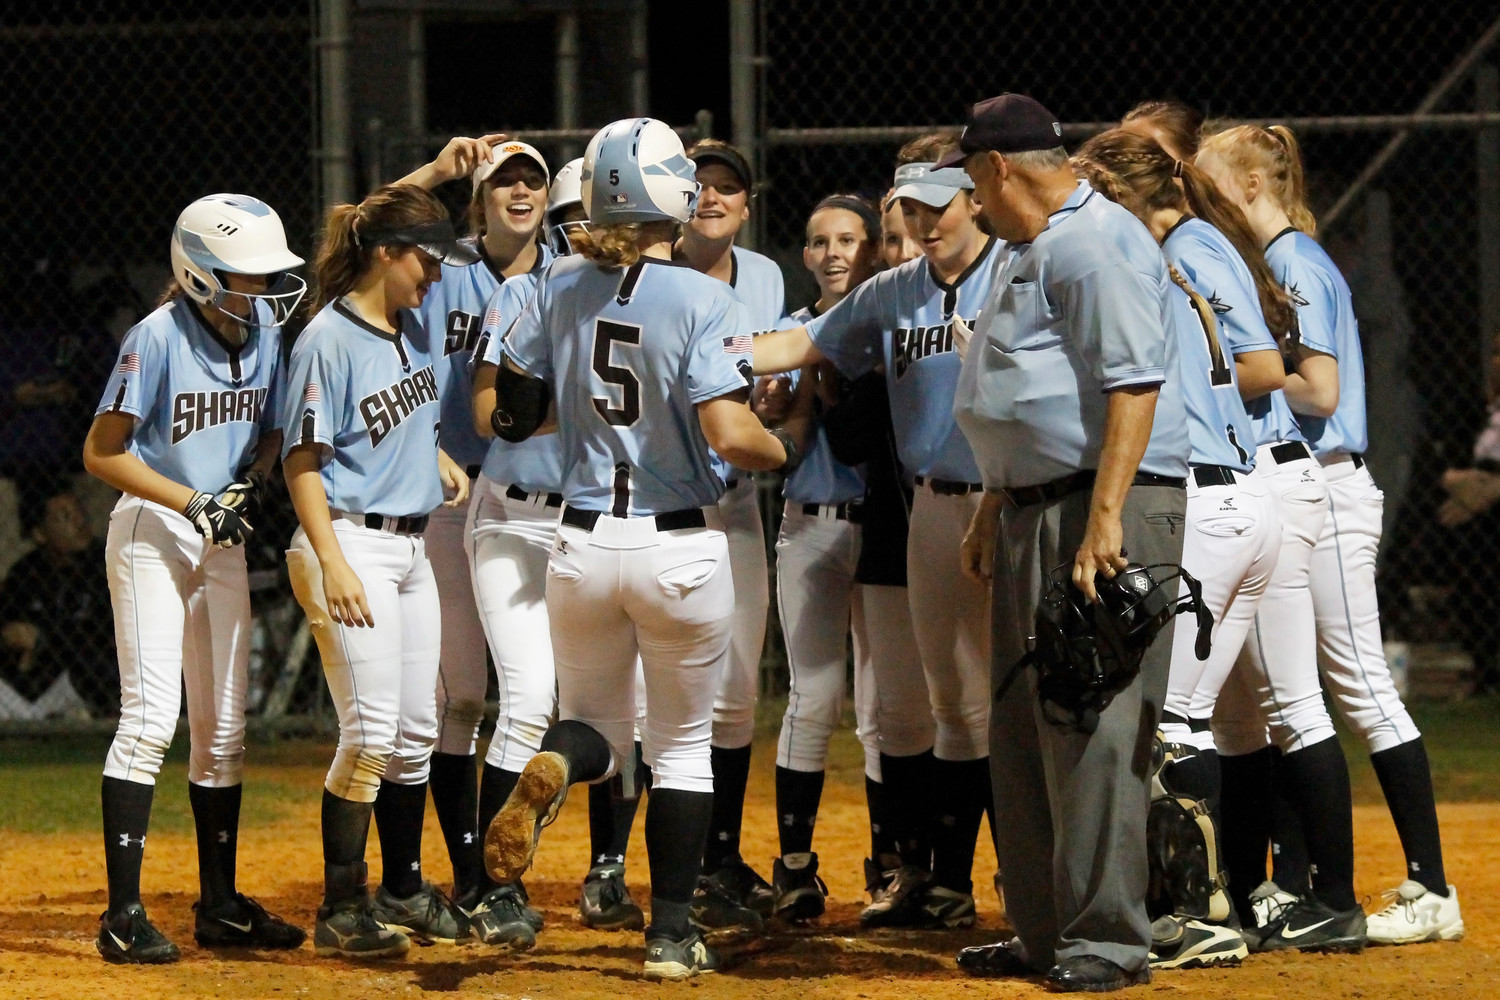 The Ponte Vedra softball team celebrates Michelle Holder’s home run in the fifth inning.